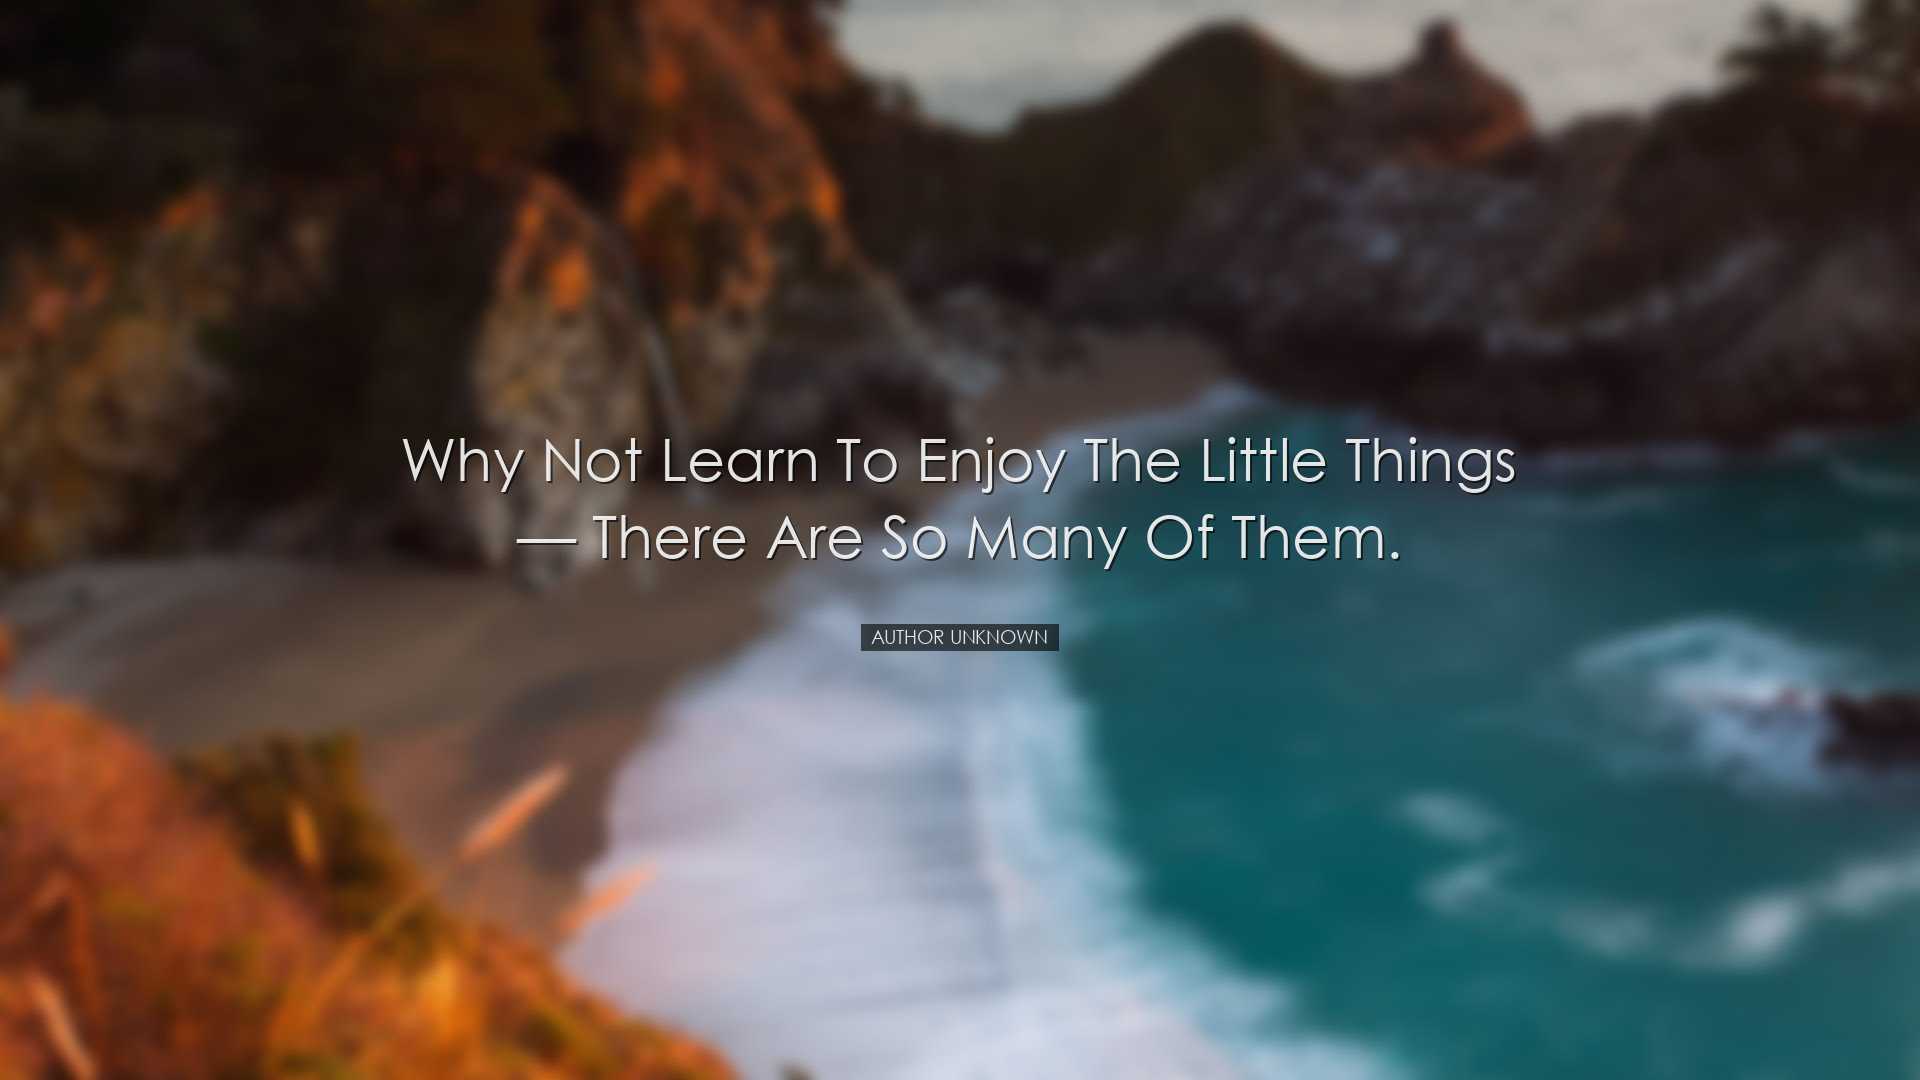 Why not learn to enjoy the little things — there are so many